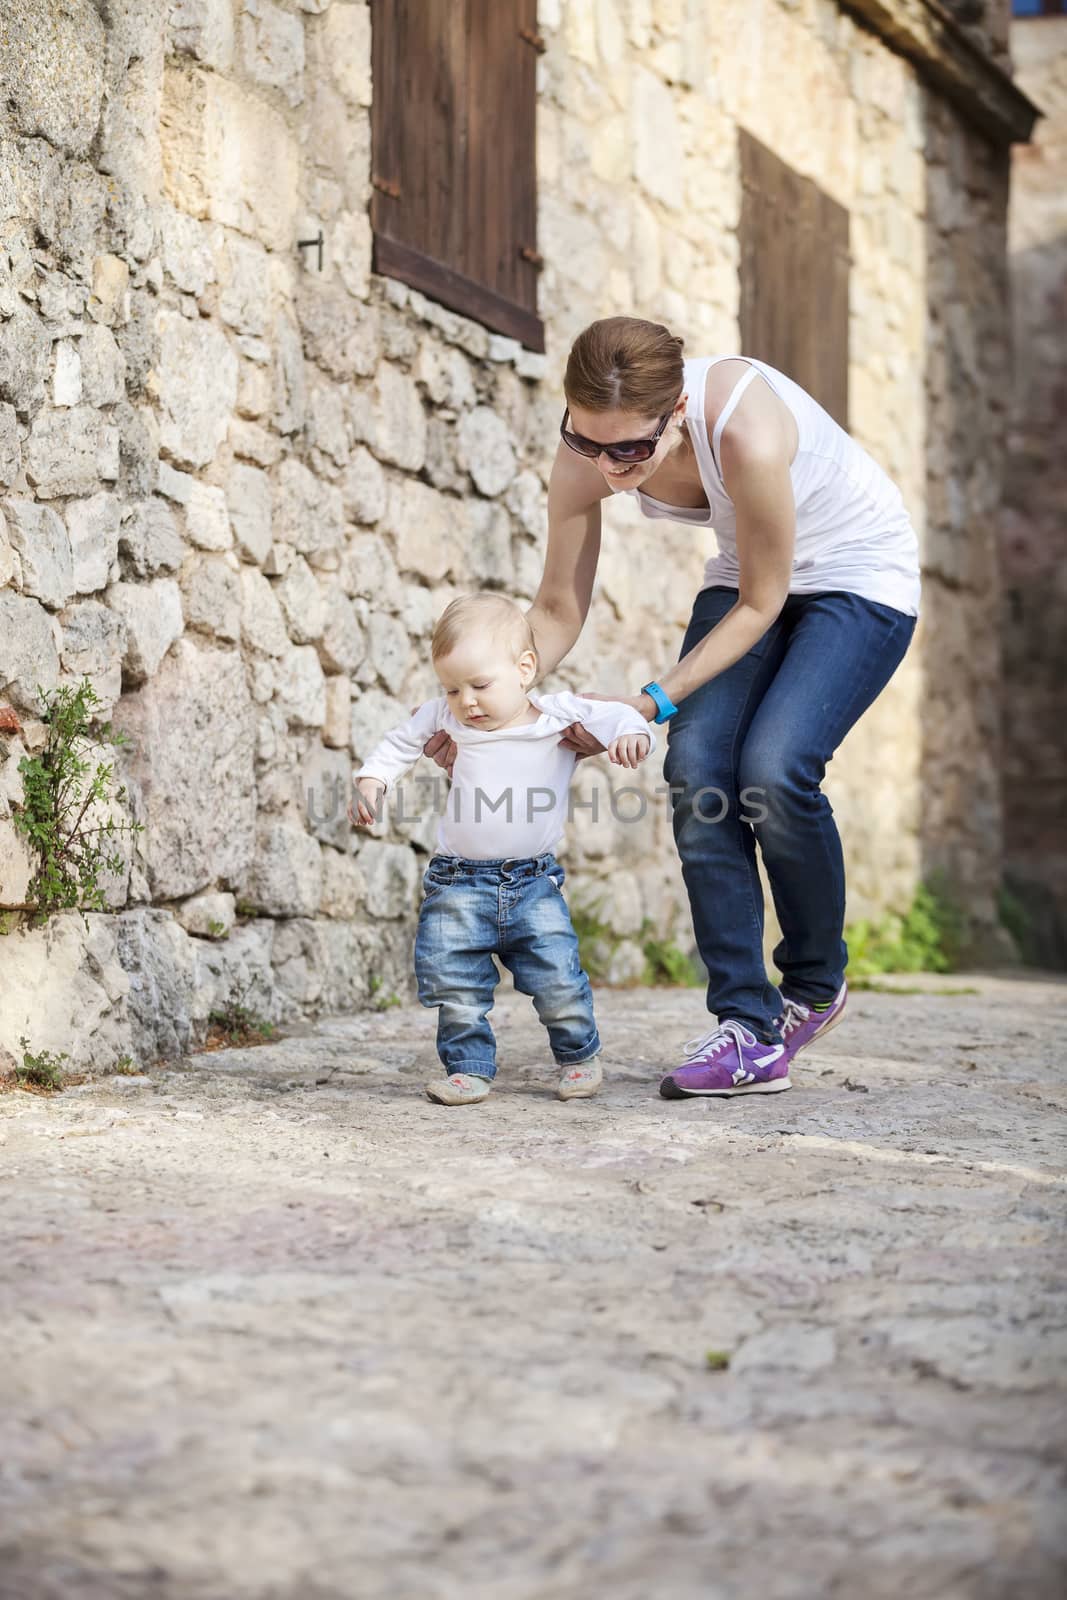 Cute baby boy makes his first steps with help of his mother